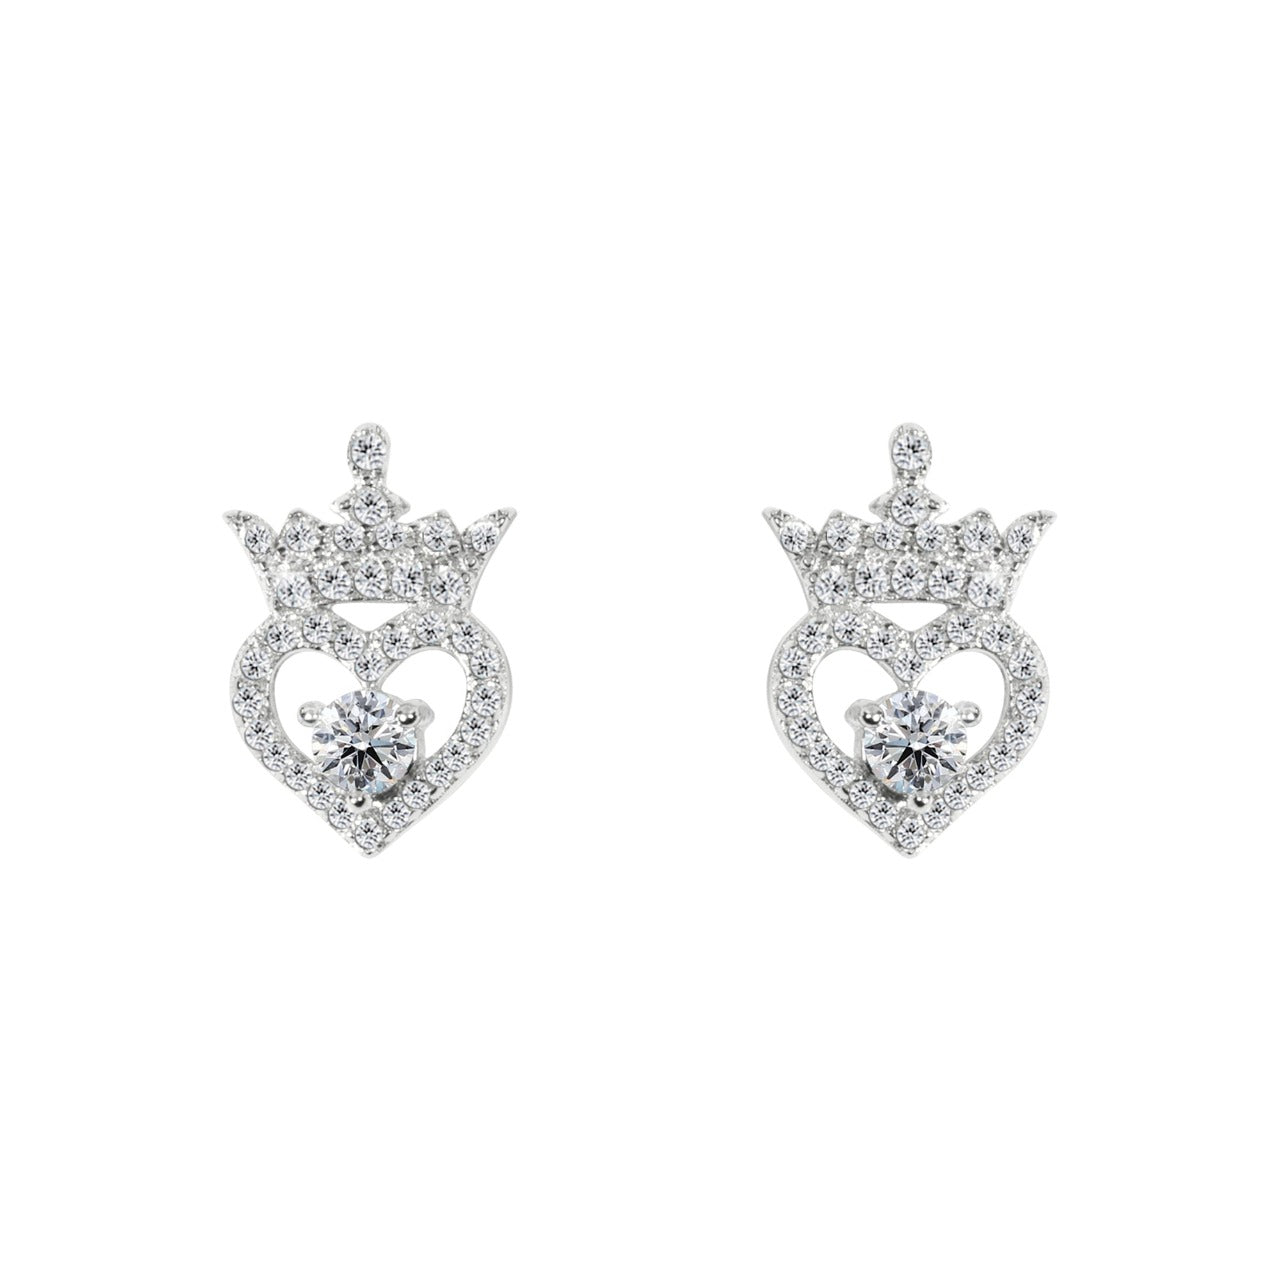 Disney Princess Sterling Silver Birthstone Crown Earrings – April  Beautiful silver Birthstone princess crown earrings with CZ crystals adding a feminine touch to the Disney classic piece of Jewellery.  Trendy and fashionable design, the Disney princess sterling silver earrings add a chic, fun touch to any outfit. the perfect gift for any Disney Princess fan.